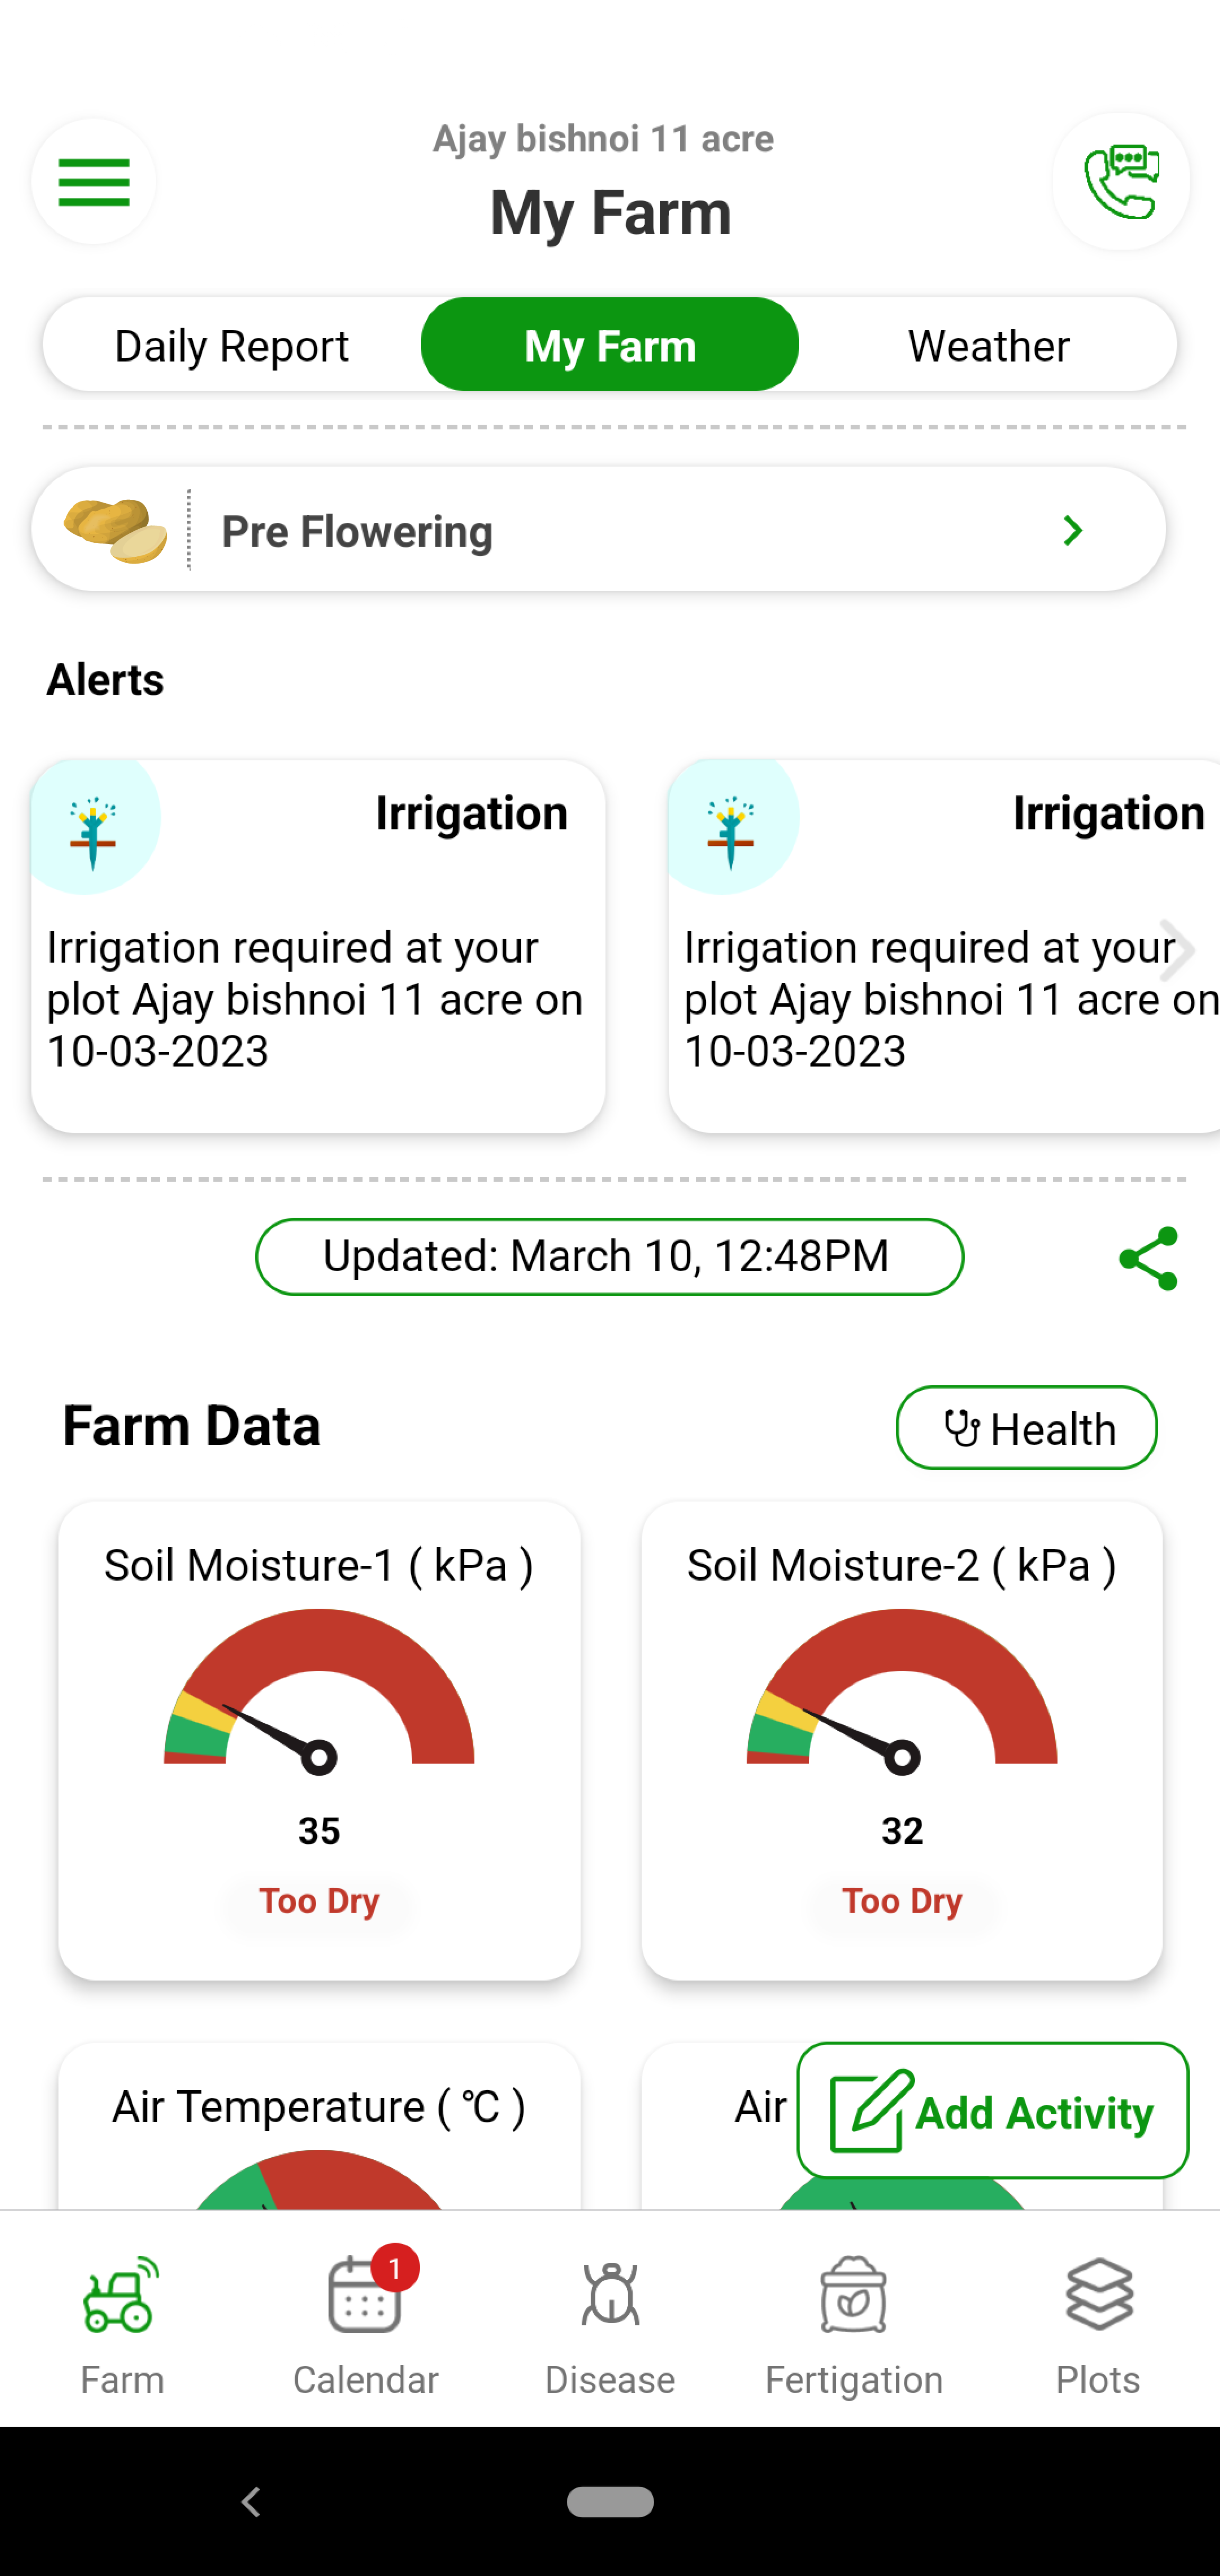 Too much water or too less water can be very harmful for potato. Over irrigation leads to wilting in the plants. Keeping soil aerated is very important for potato growing. Potato’s water requirements vary based on soil type and stage. With Fyllo’s device containing soil moisture and soil temperature sensor and intelligent software, you get alerts on how much water to provide to the crop. You can also see and visualize evapotranspiration (Etc) values of the crop. You can perfectly manage the water requirements to get the perfect size, color and sugar.